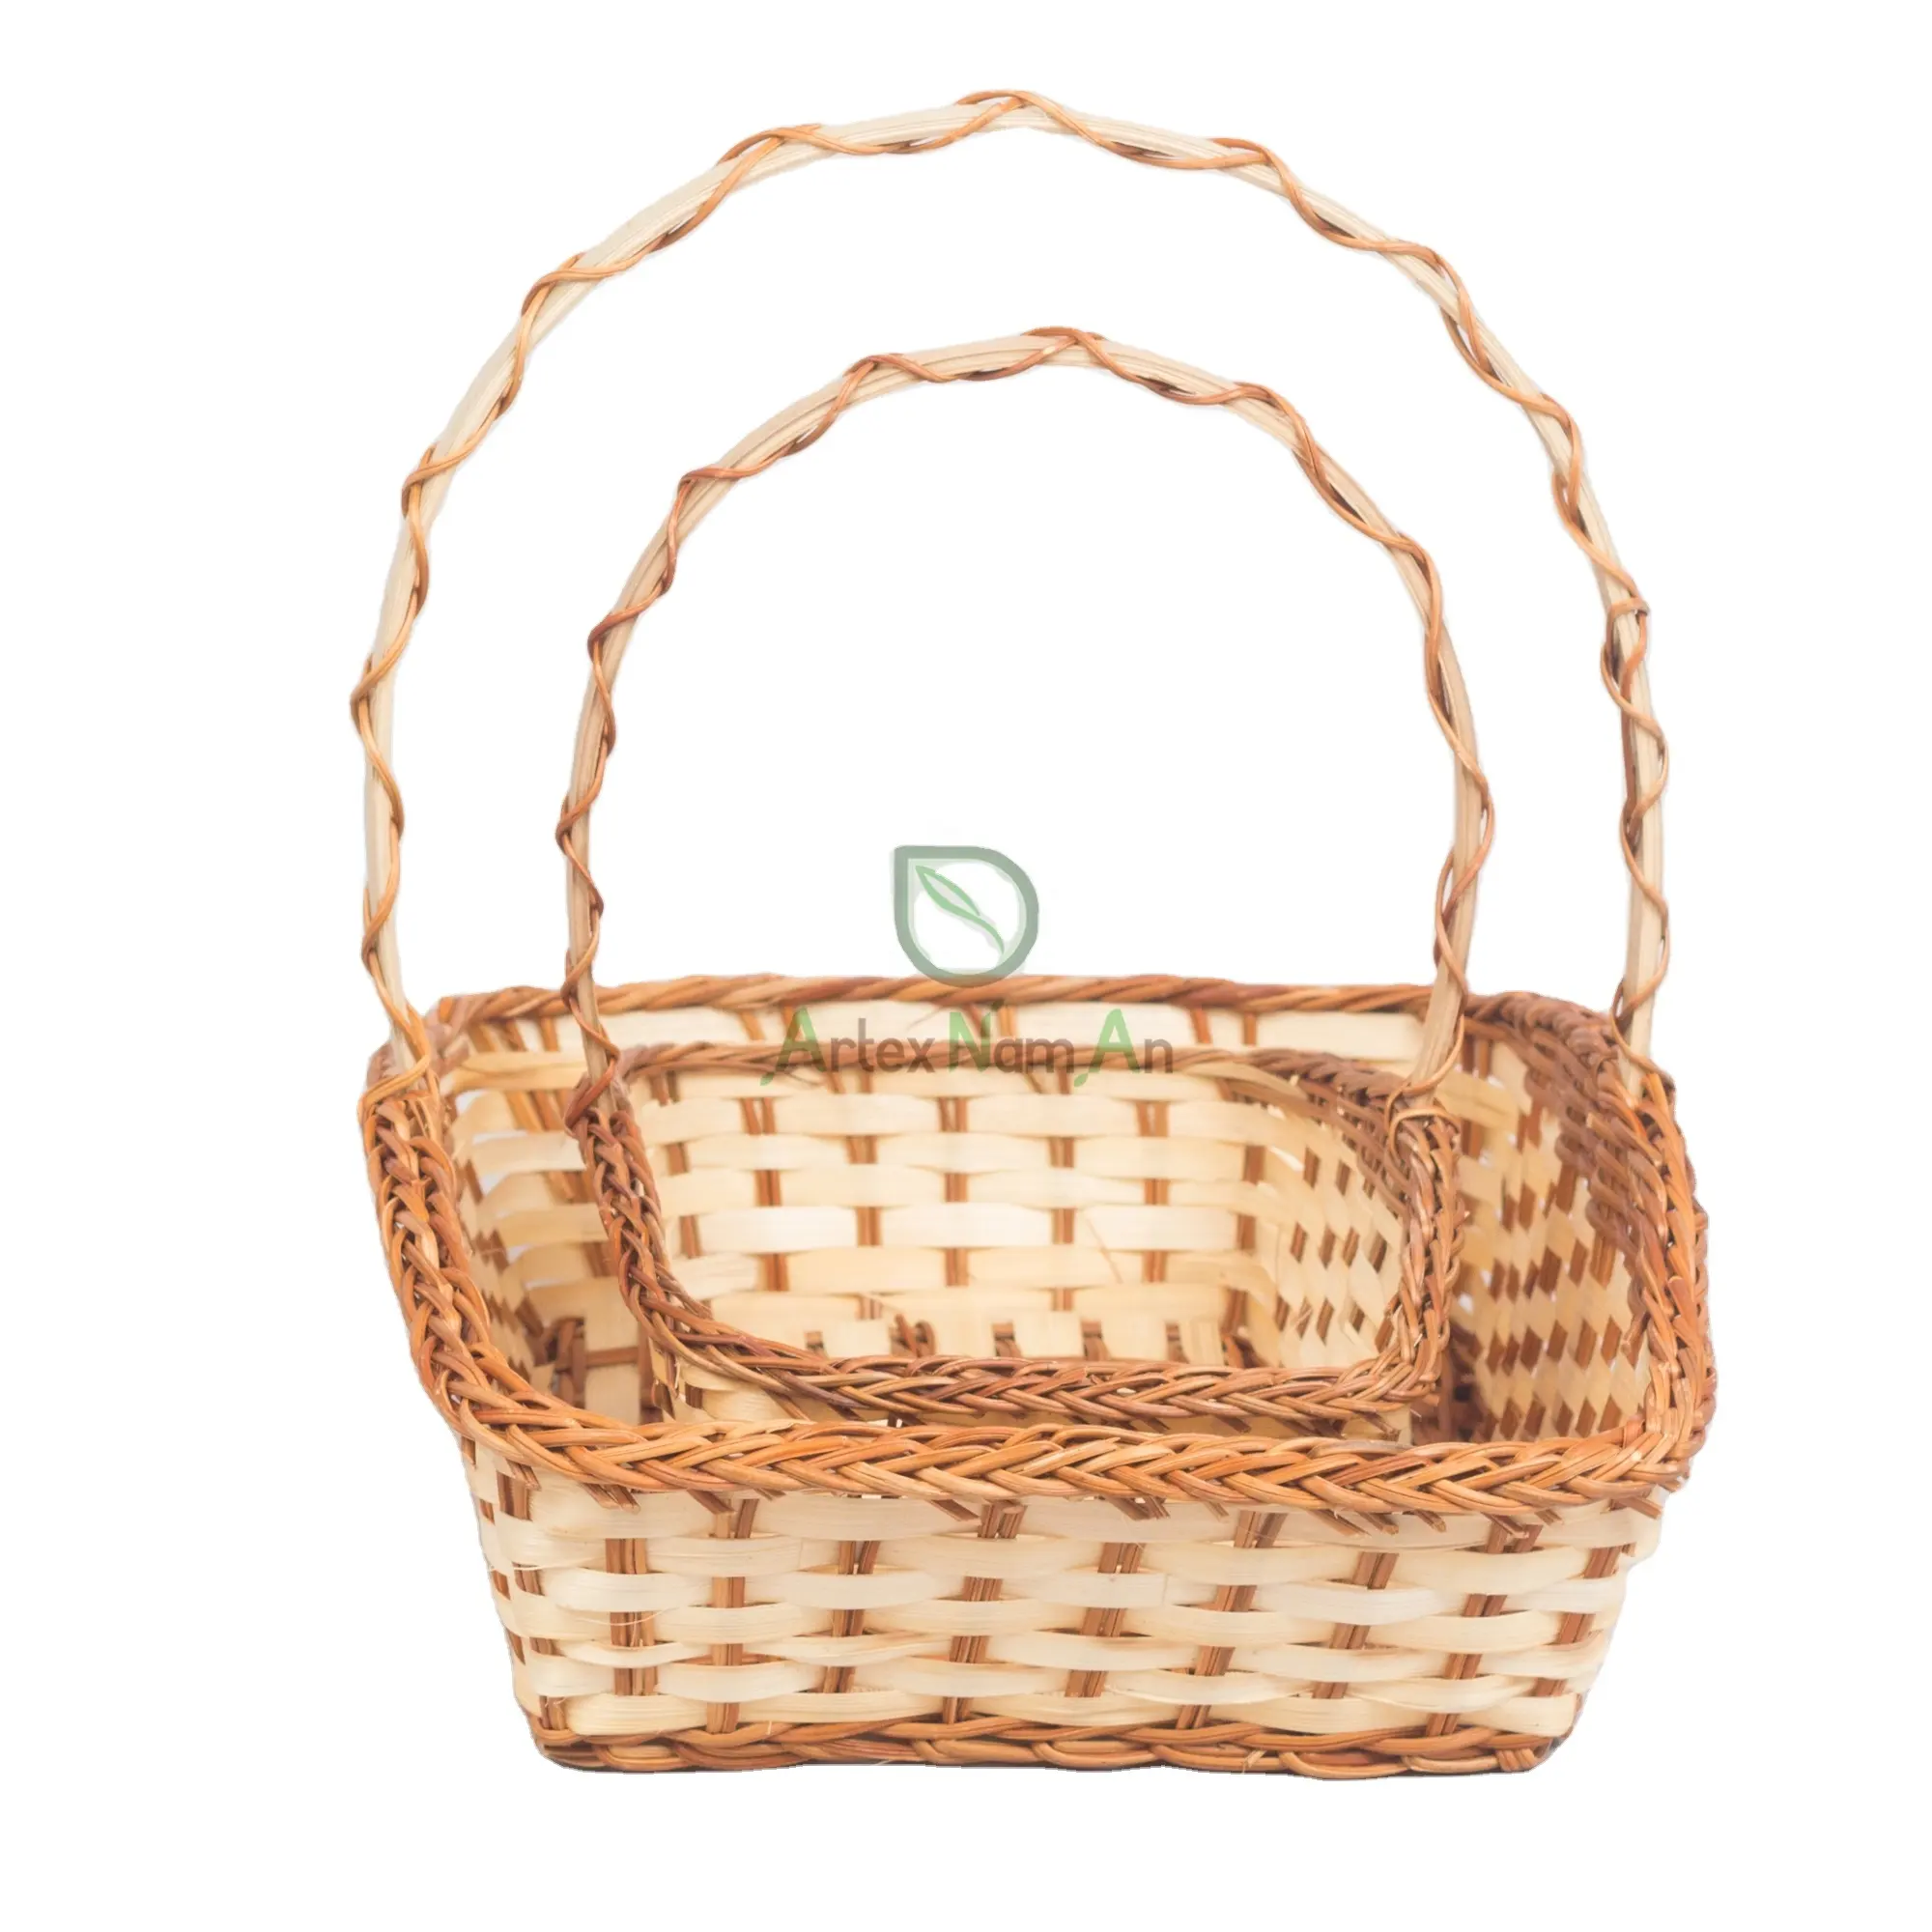 Newest Design Small Rattan Wicker Gift Baskets/baskets for Gifts/gift Baskets in Bulk Package Carton Packing Multifunction Round